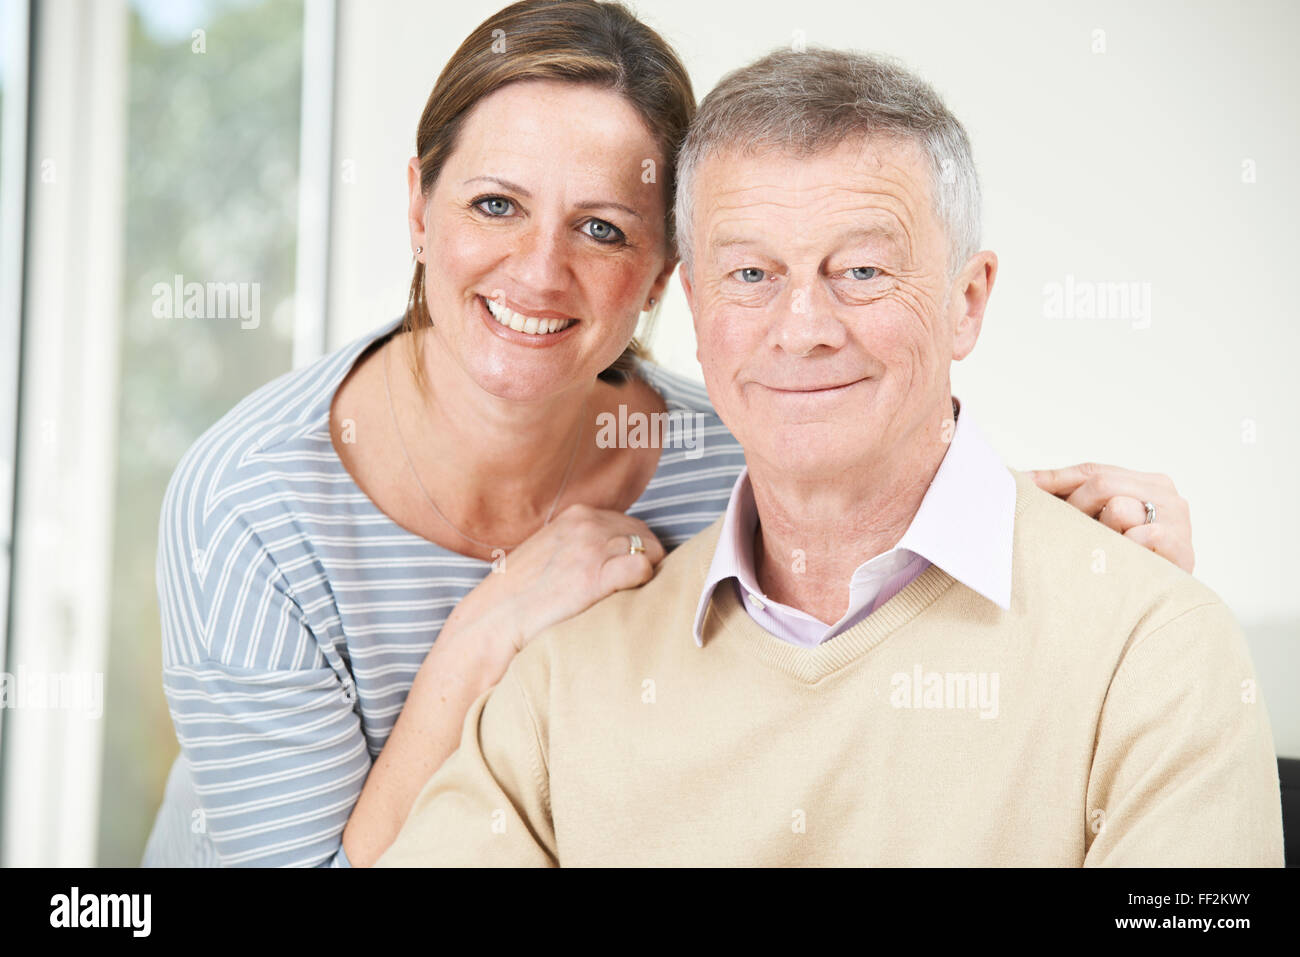 Portrait Of Senior Man With Adult Daughter Stock Photo